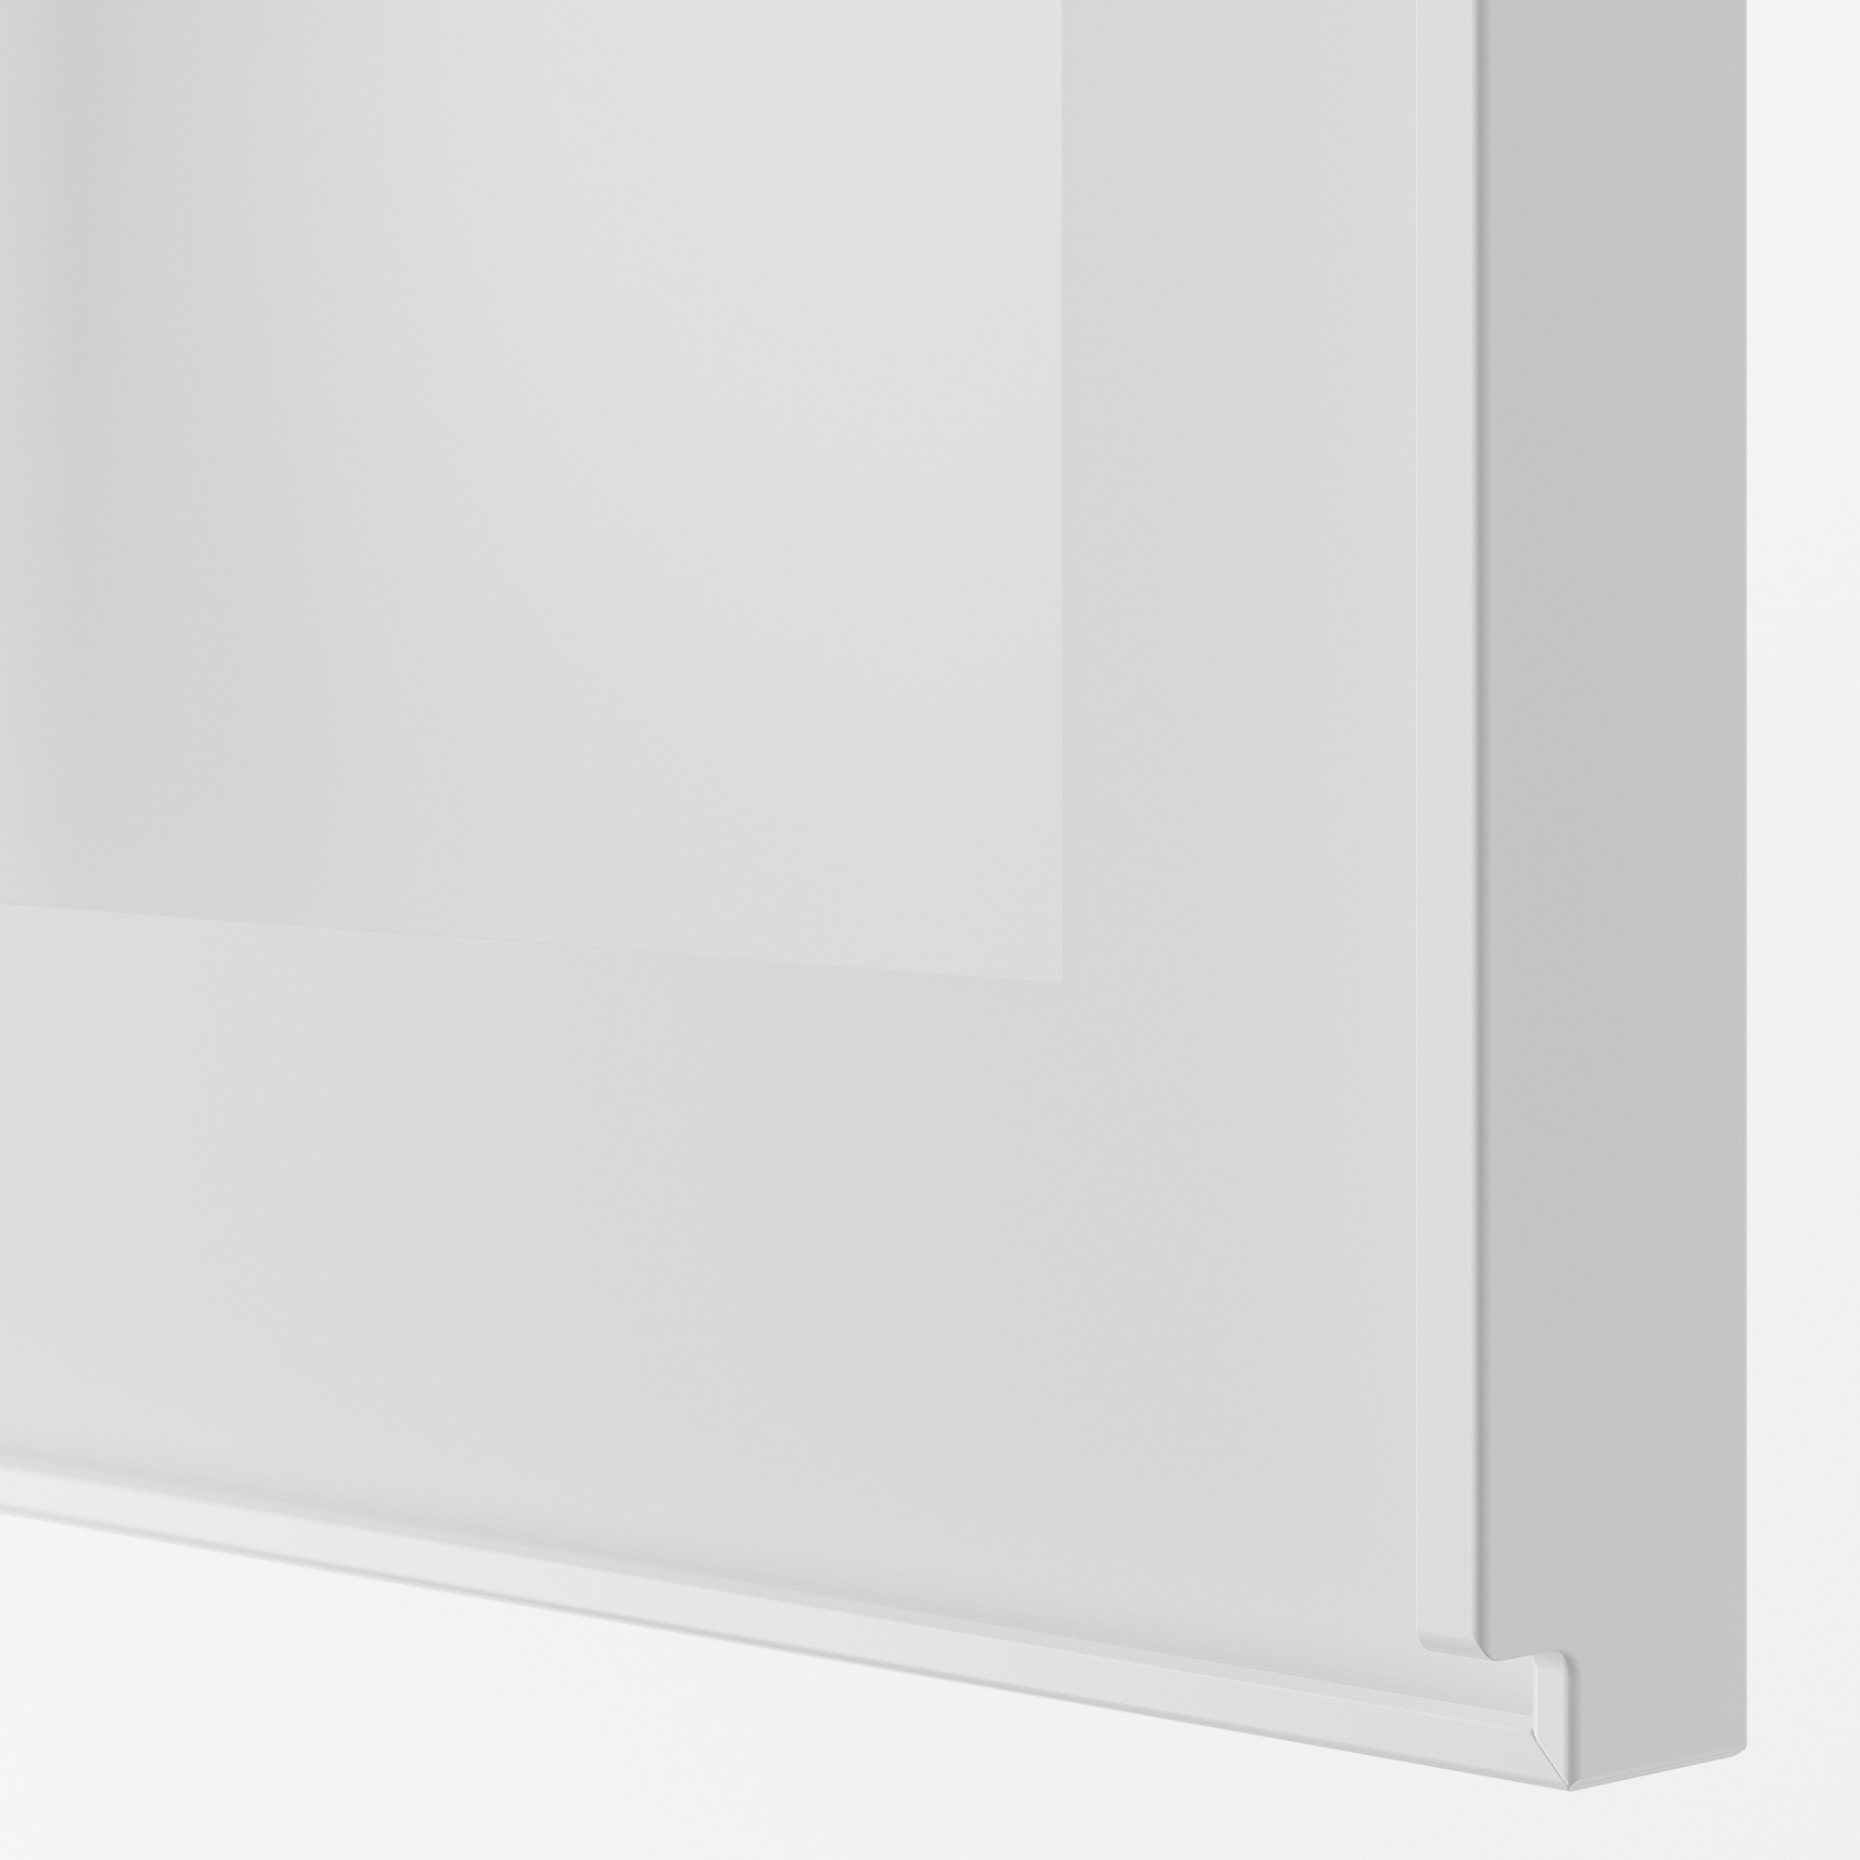 METOD, wall cabinet with shelves/2 glass doors, 80x100 cm, 694.905.72